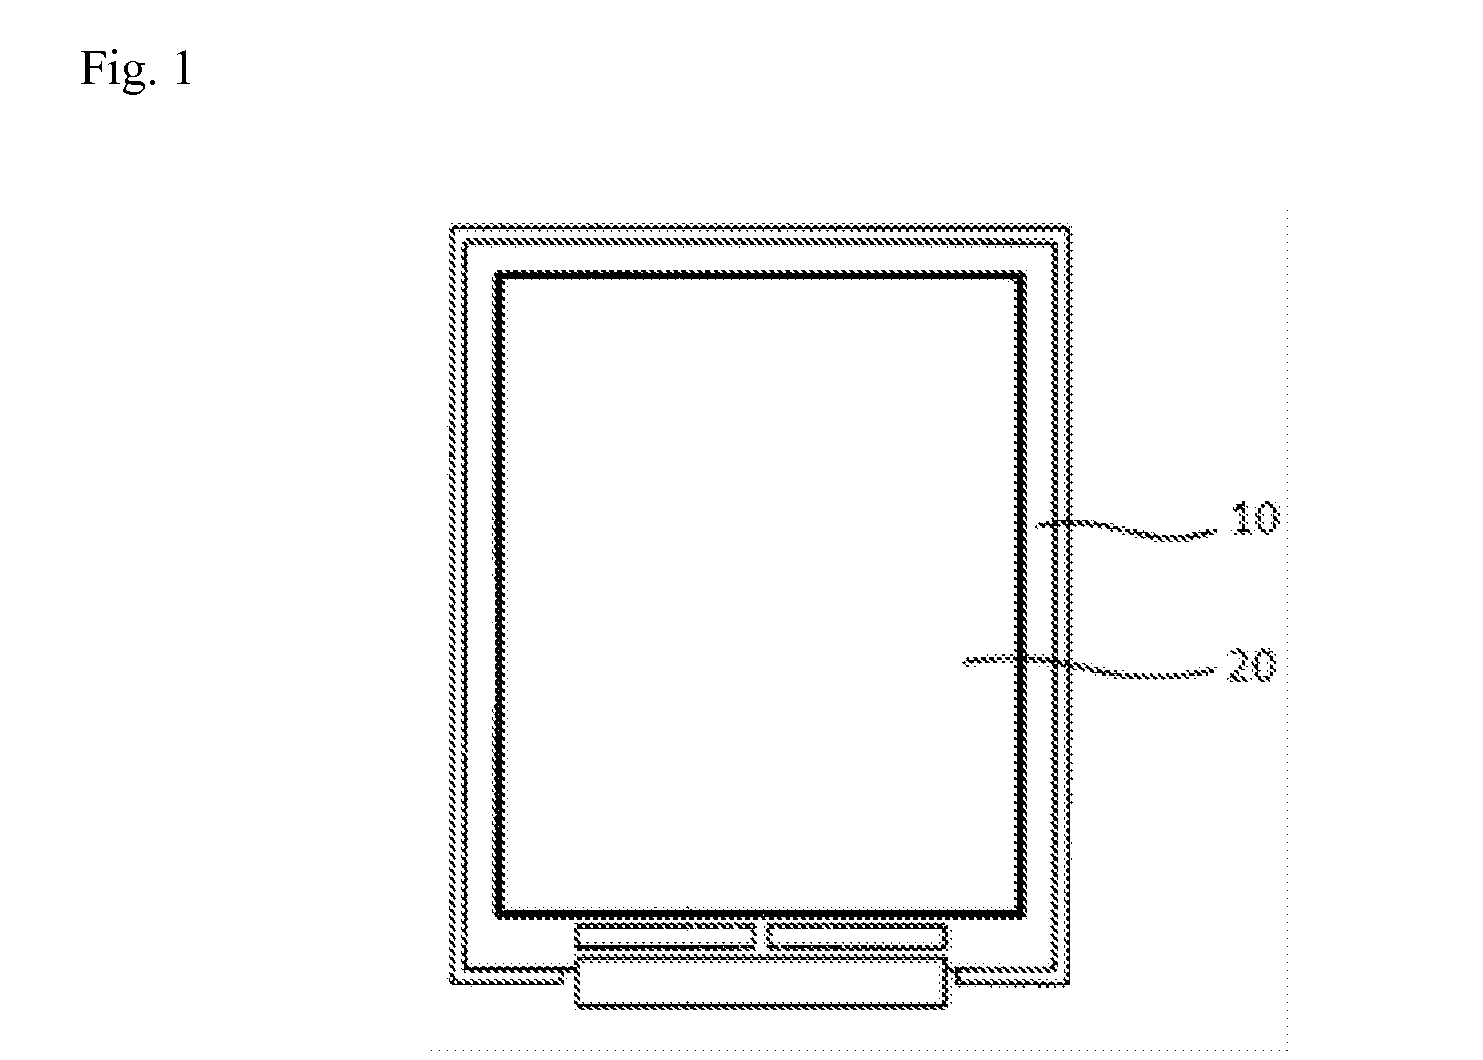 Bracket for Protecting Liquid Crystal Display (LCD) of Portable Display Device